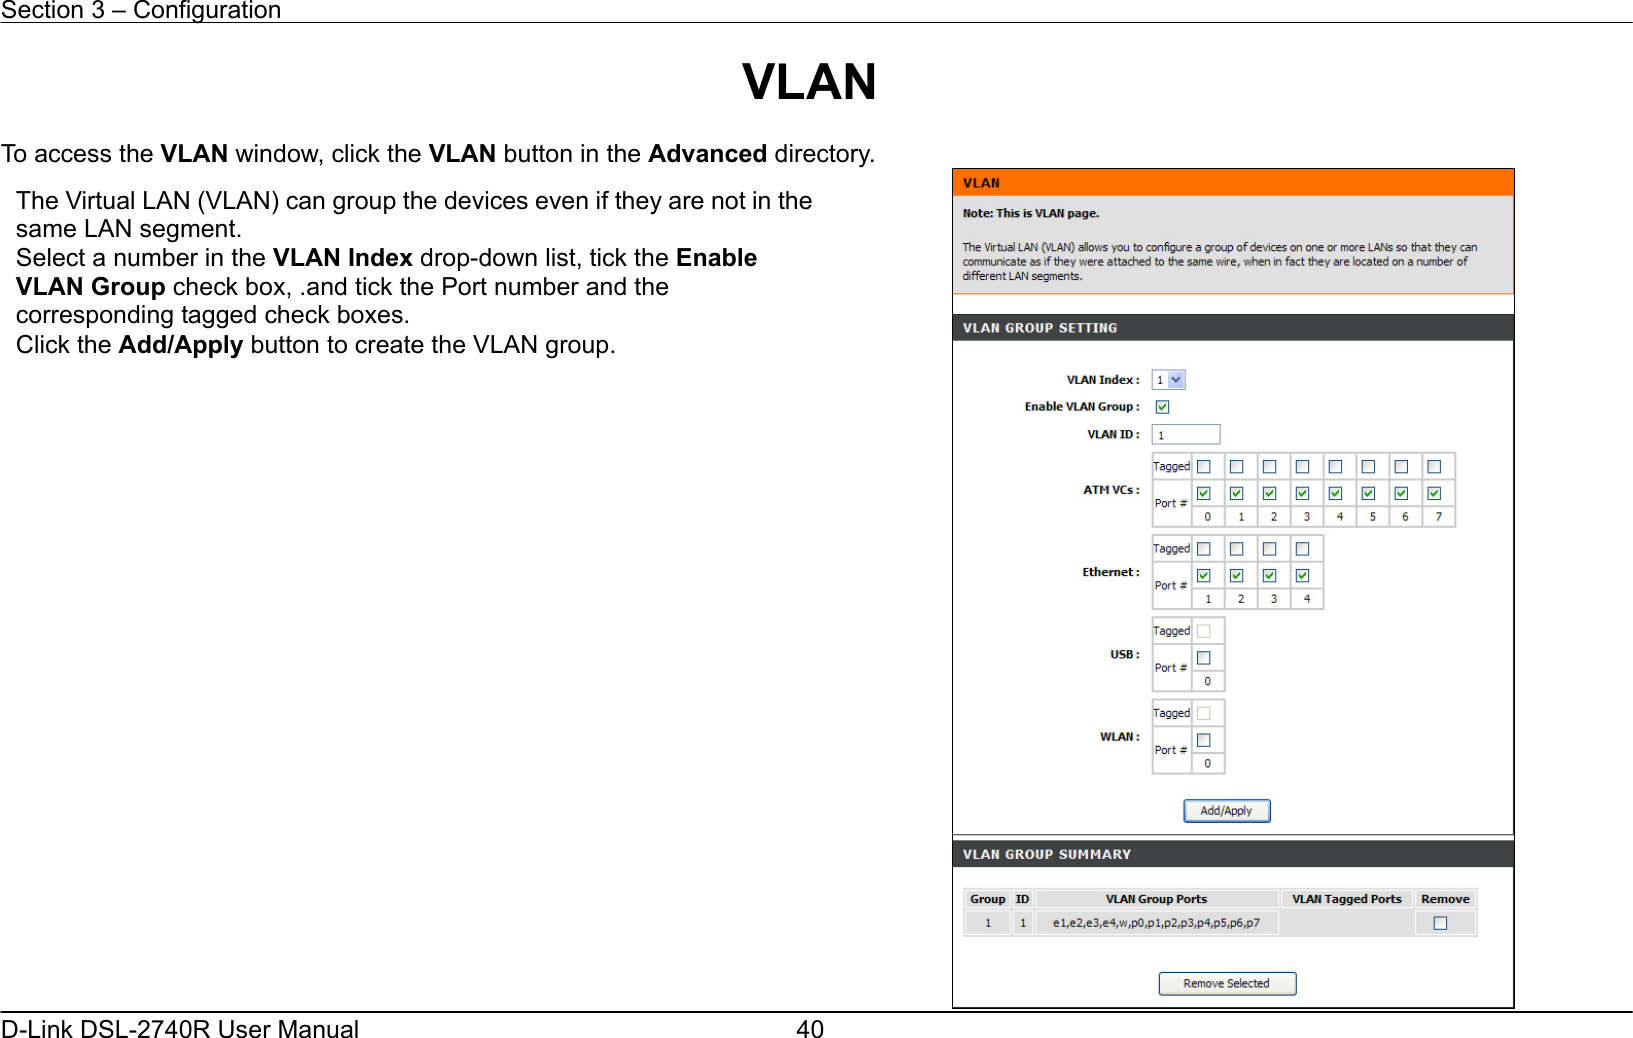 Section 3 – Configuration   D-Link DSL-2740R User Manual  40VLAN  To access the VLAN window, click the VLAN button in the Advanced directory.  The Virtual LAN (VLAN) can group the devices even if they are not in thesame LAN segment. Select a number in the VLAN Index drop-down list, tick the Enable VLAN Group check box, .and tick the Port number and the corresponding tagged check boxes. Click the Add/Apply button to create the VLAN group. 